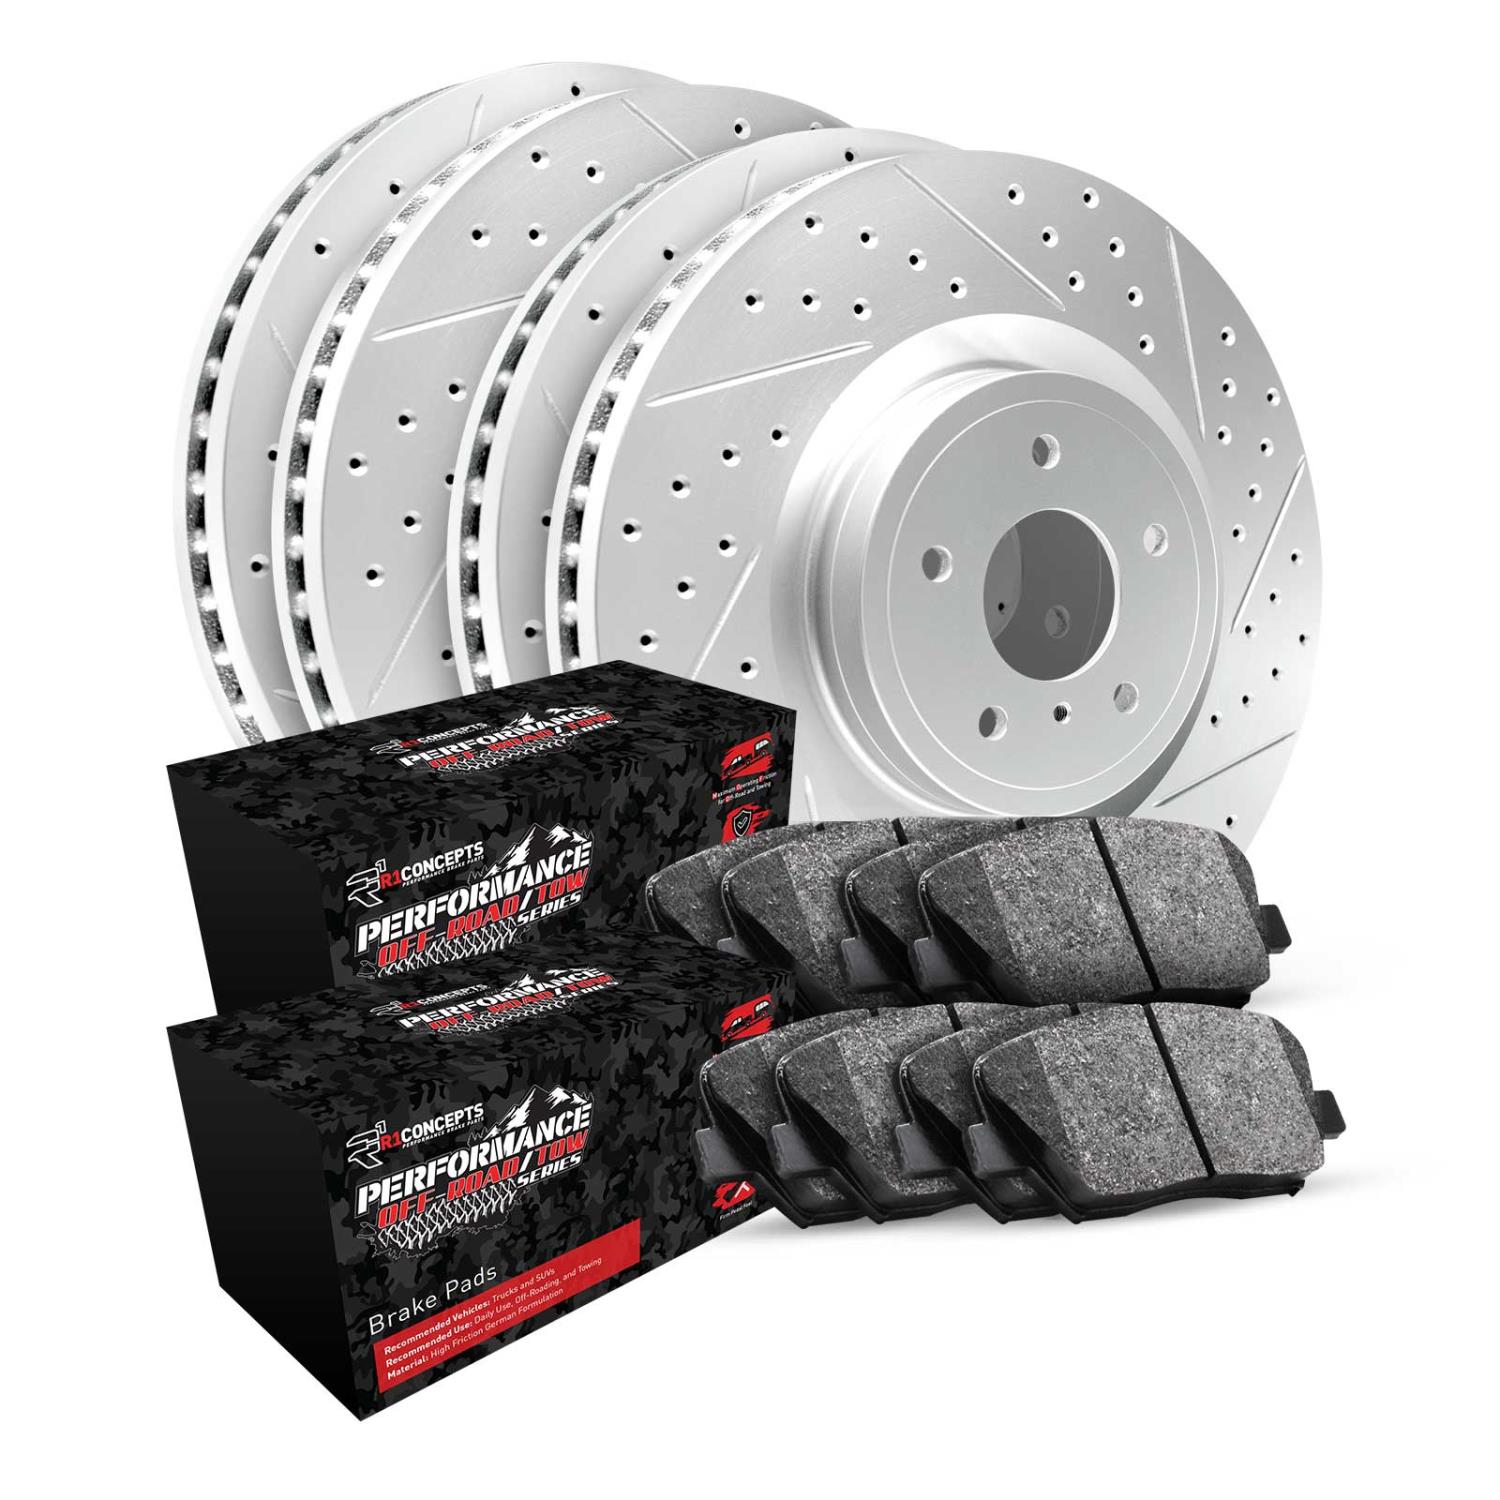 GEO-Carbon Drilled & Slotted Brake Rotor Set w/Performance Off-Road/Tow Pads, 1999-2004 Ford/Lincoln/Mercury/Mazda